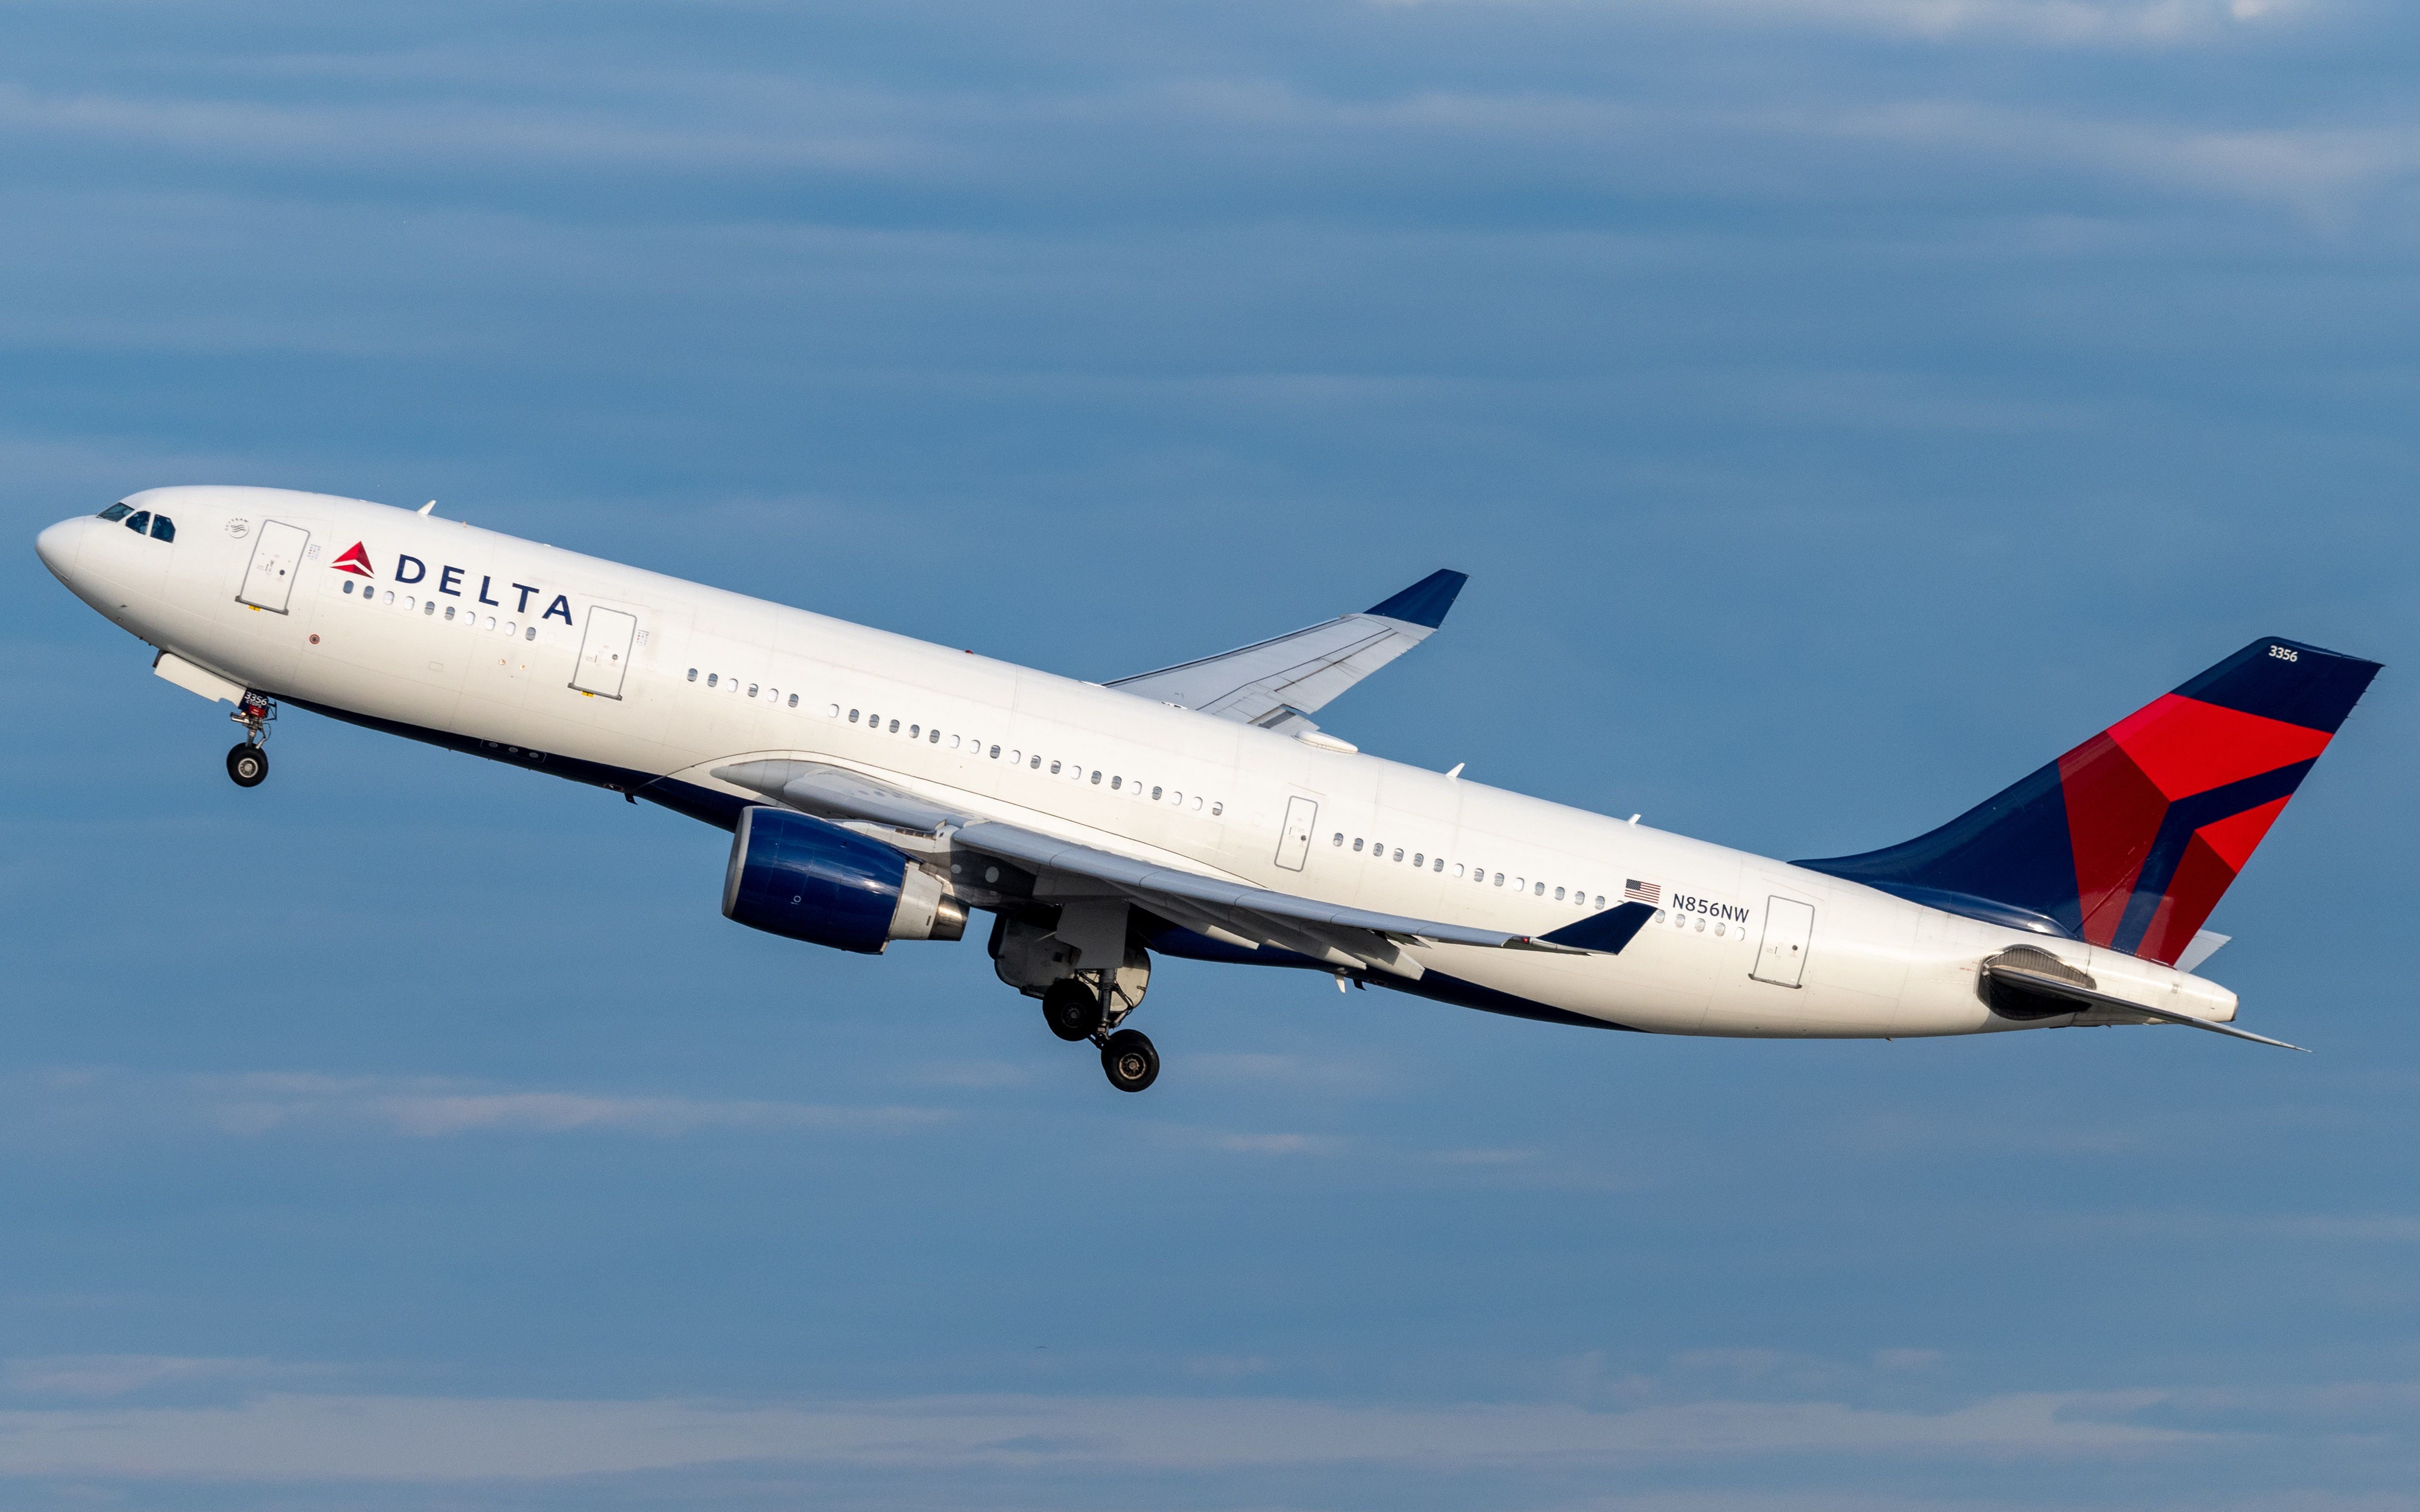 Delta Air Lines Has 10 More Europe Flights This November Than In 2019